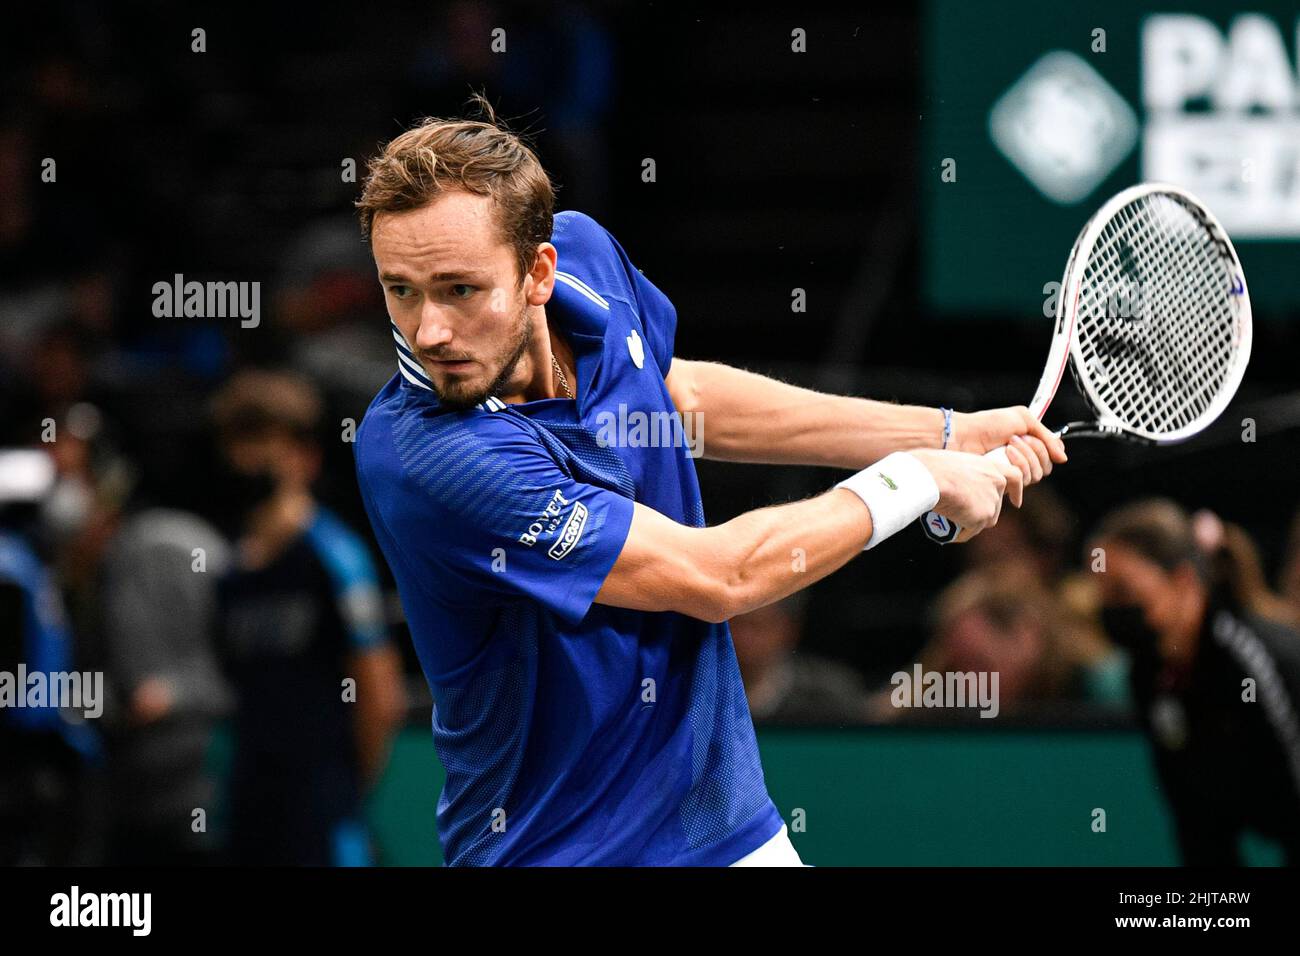 Daniil Medvedev of Russia during the Rolex Paris Masters, ATP Masters 1000 tennis tournament, on November 3, 2021 at Accor Arena in Paris, France. Stock Photo